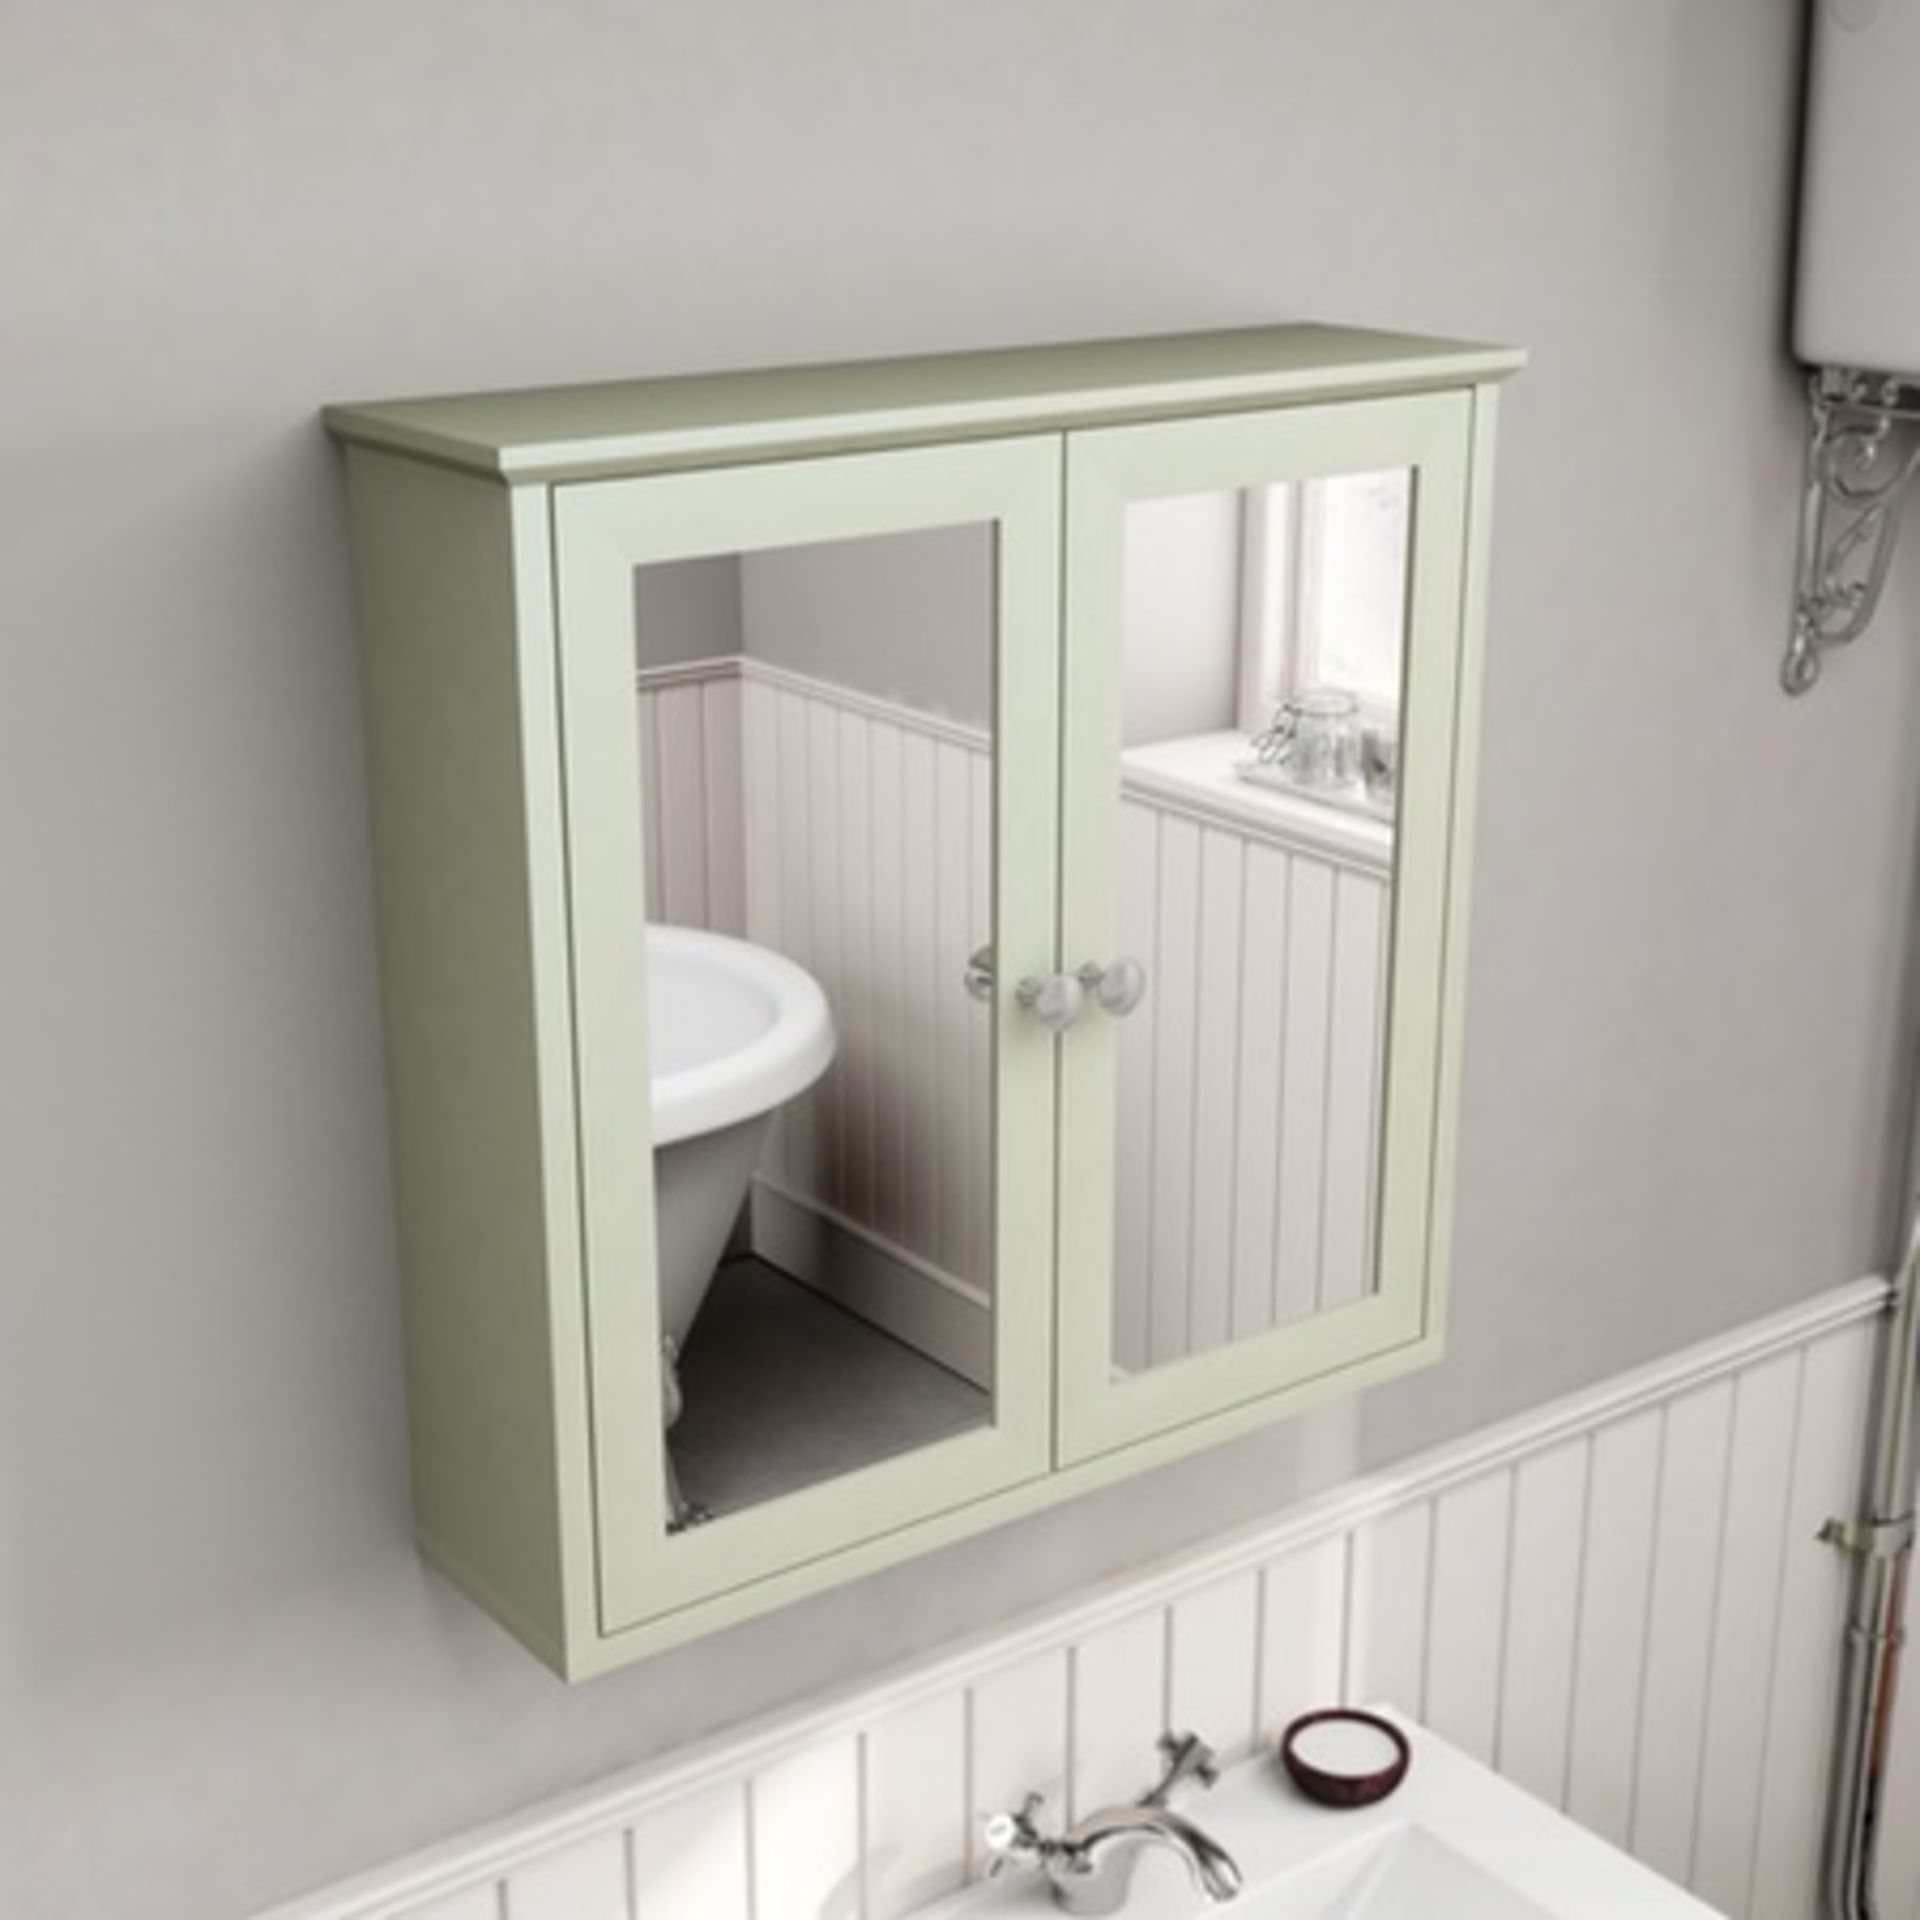 1 x Camberley Bathroom Furniture Set Including 600mm Vanity Unit, Back to Wall Toilet Unit and - Image 6 of 18